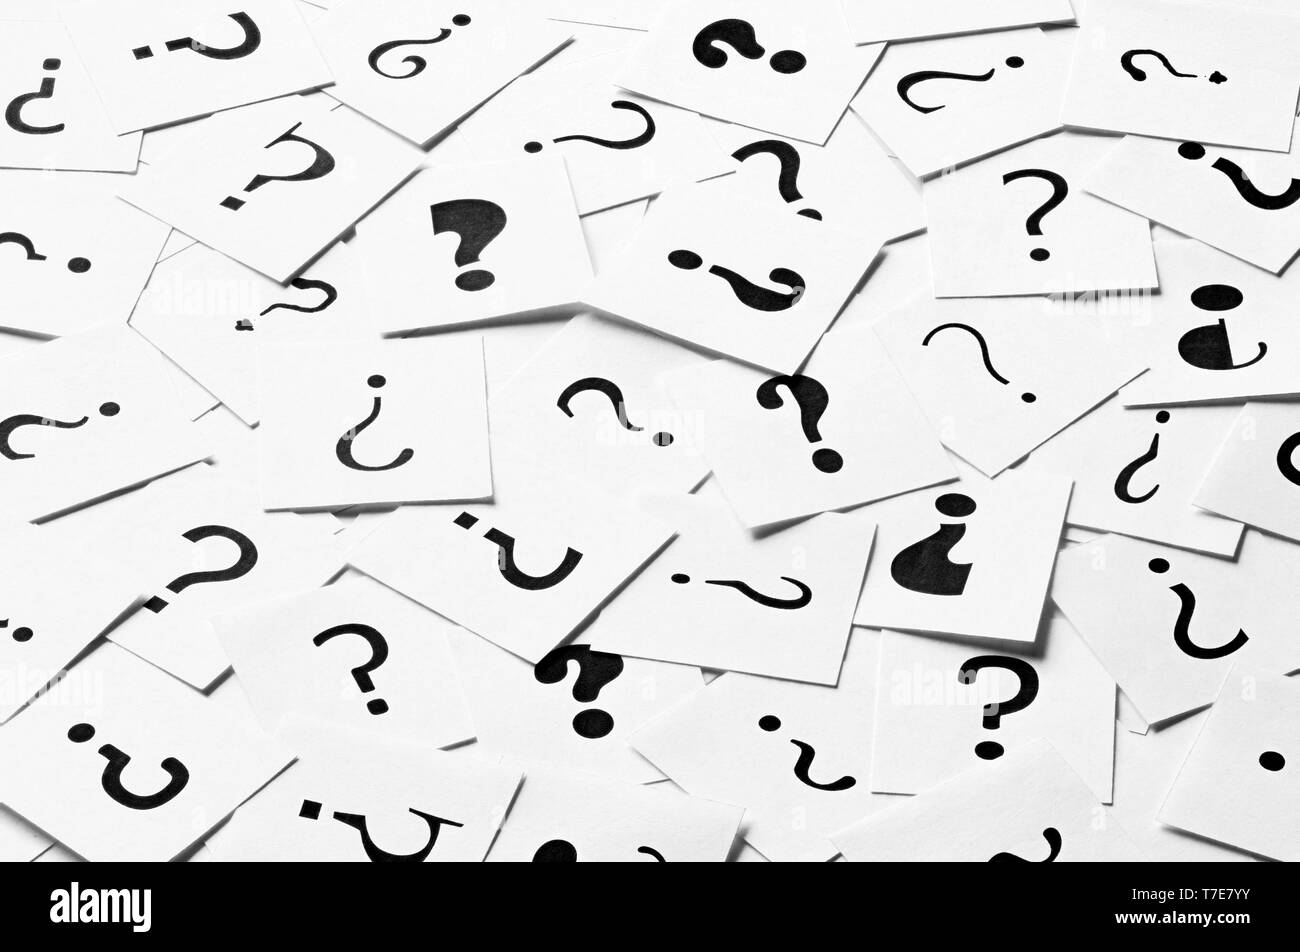 Pile of question mark signs scattered around as a square background. Decision, enquiry or faq concept. Stock Photo